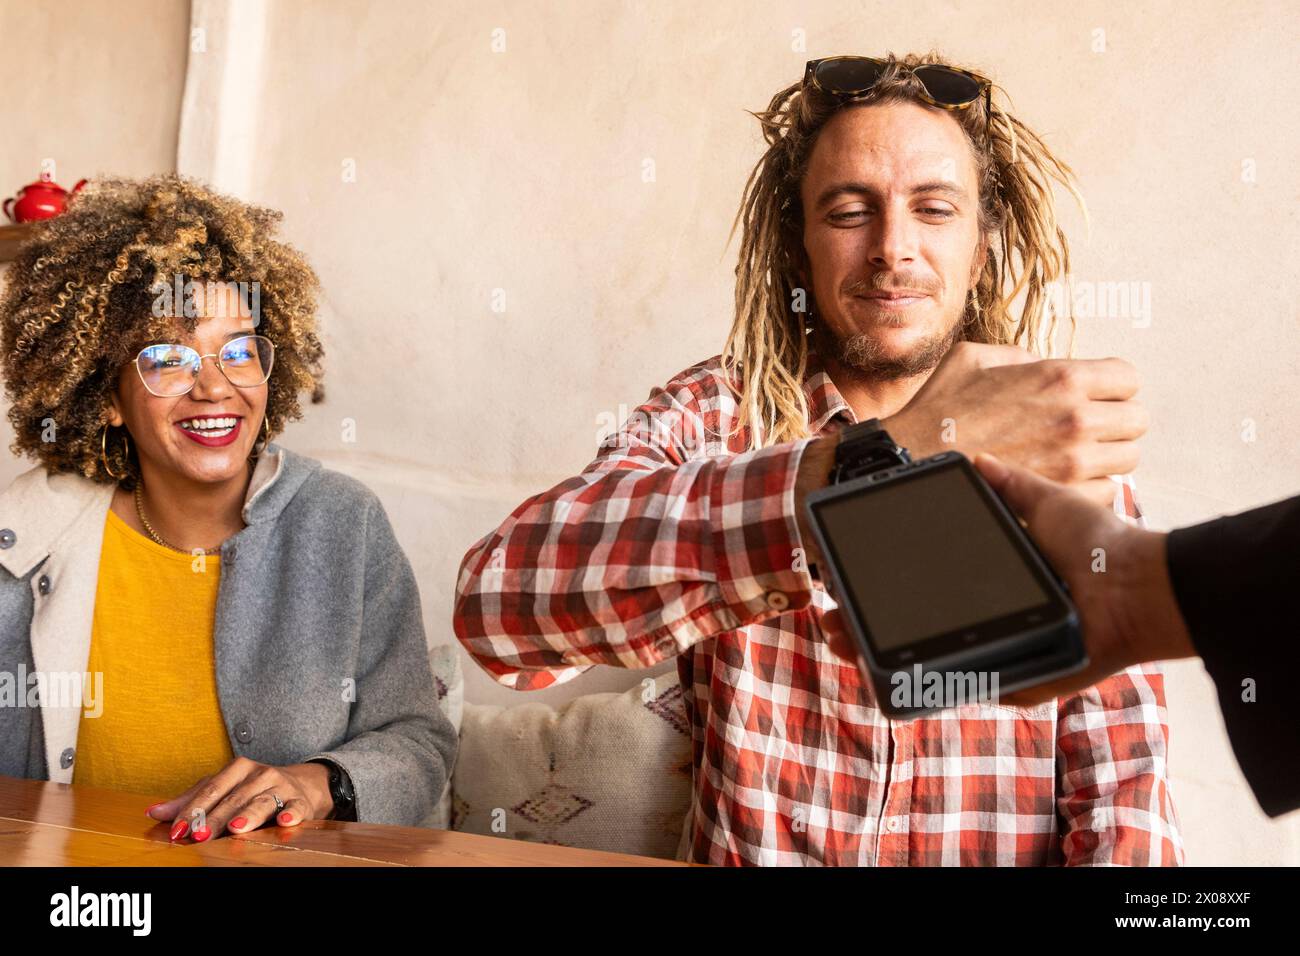 A group of cheerful friends laugh and share a moment of camaraderie as one person uses a digital wristwatch to make a contactless payment at a bar Stock Photo